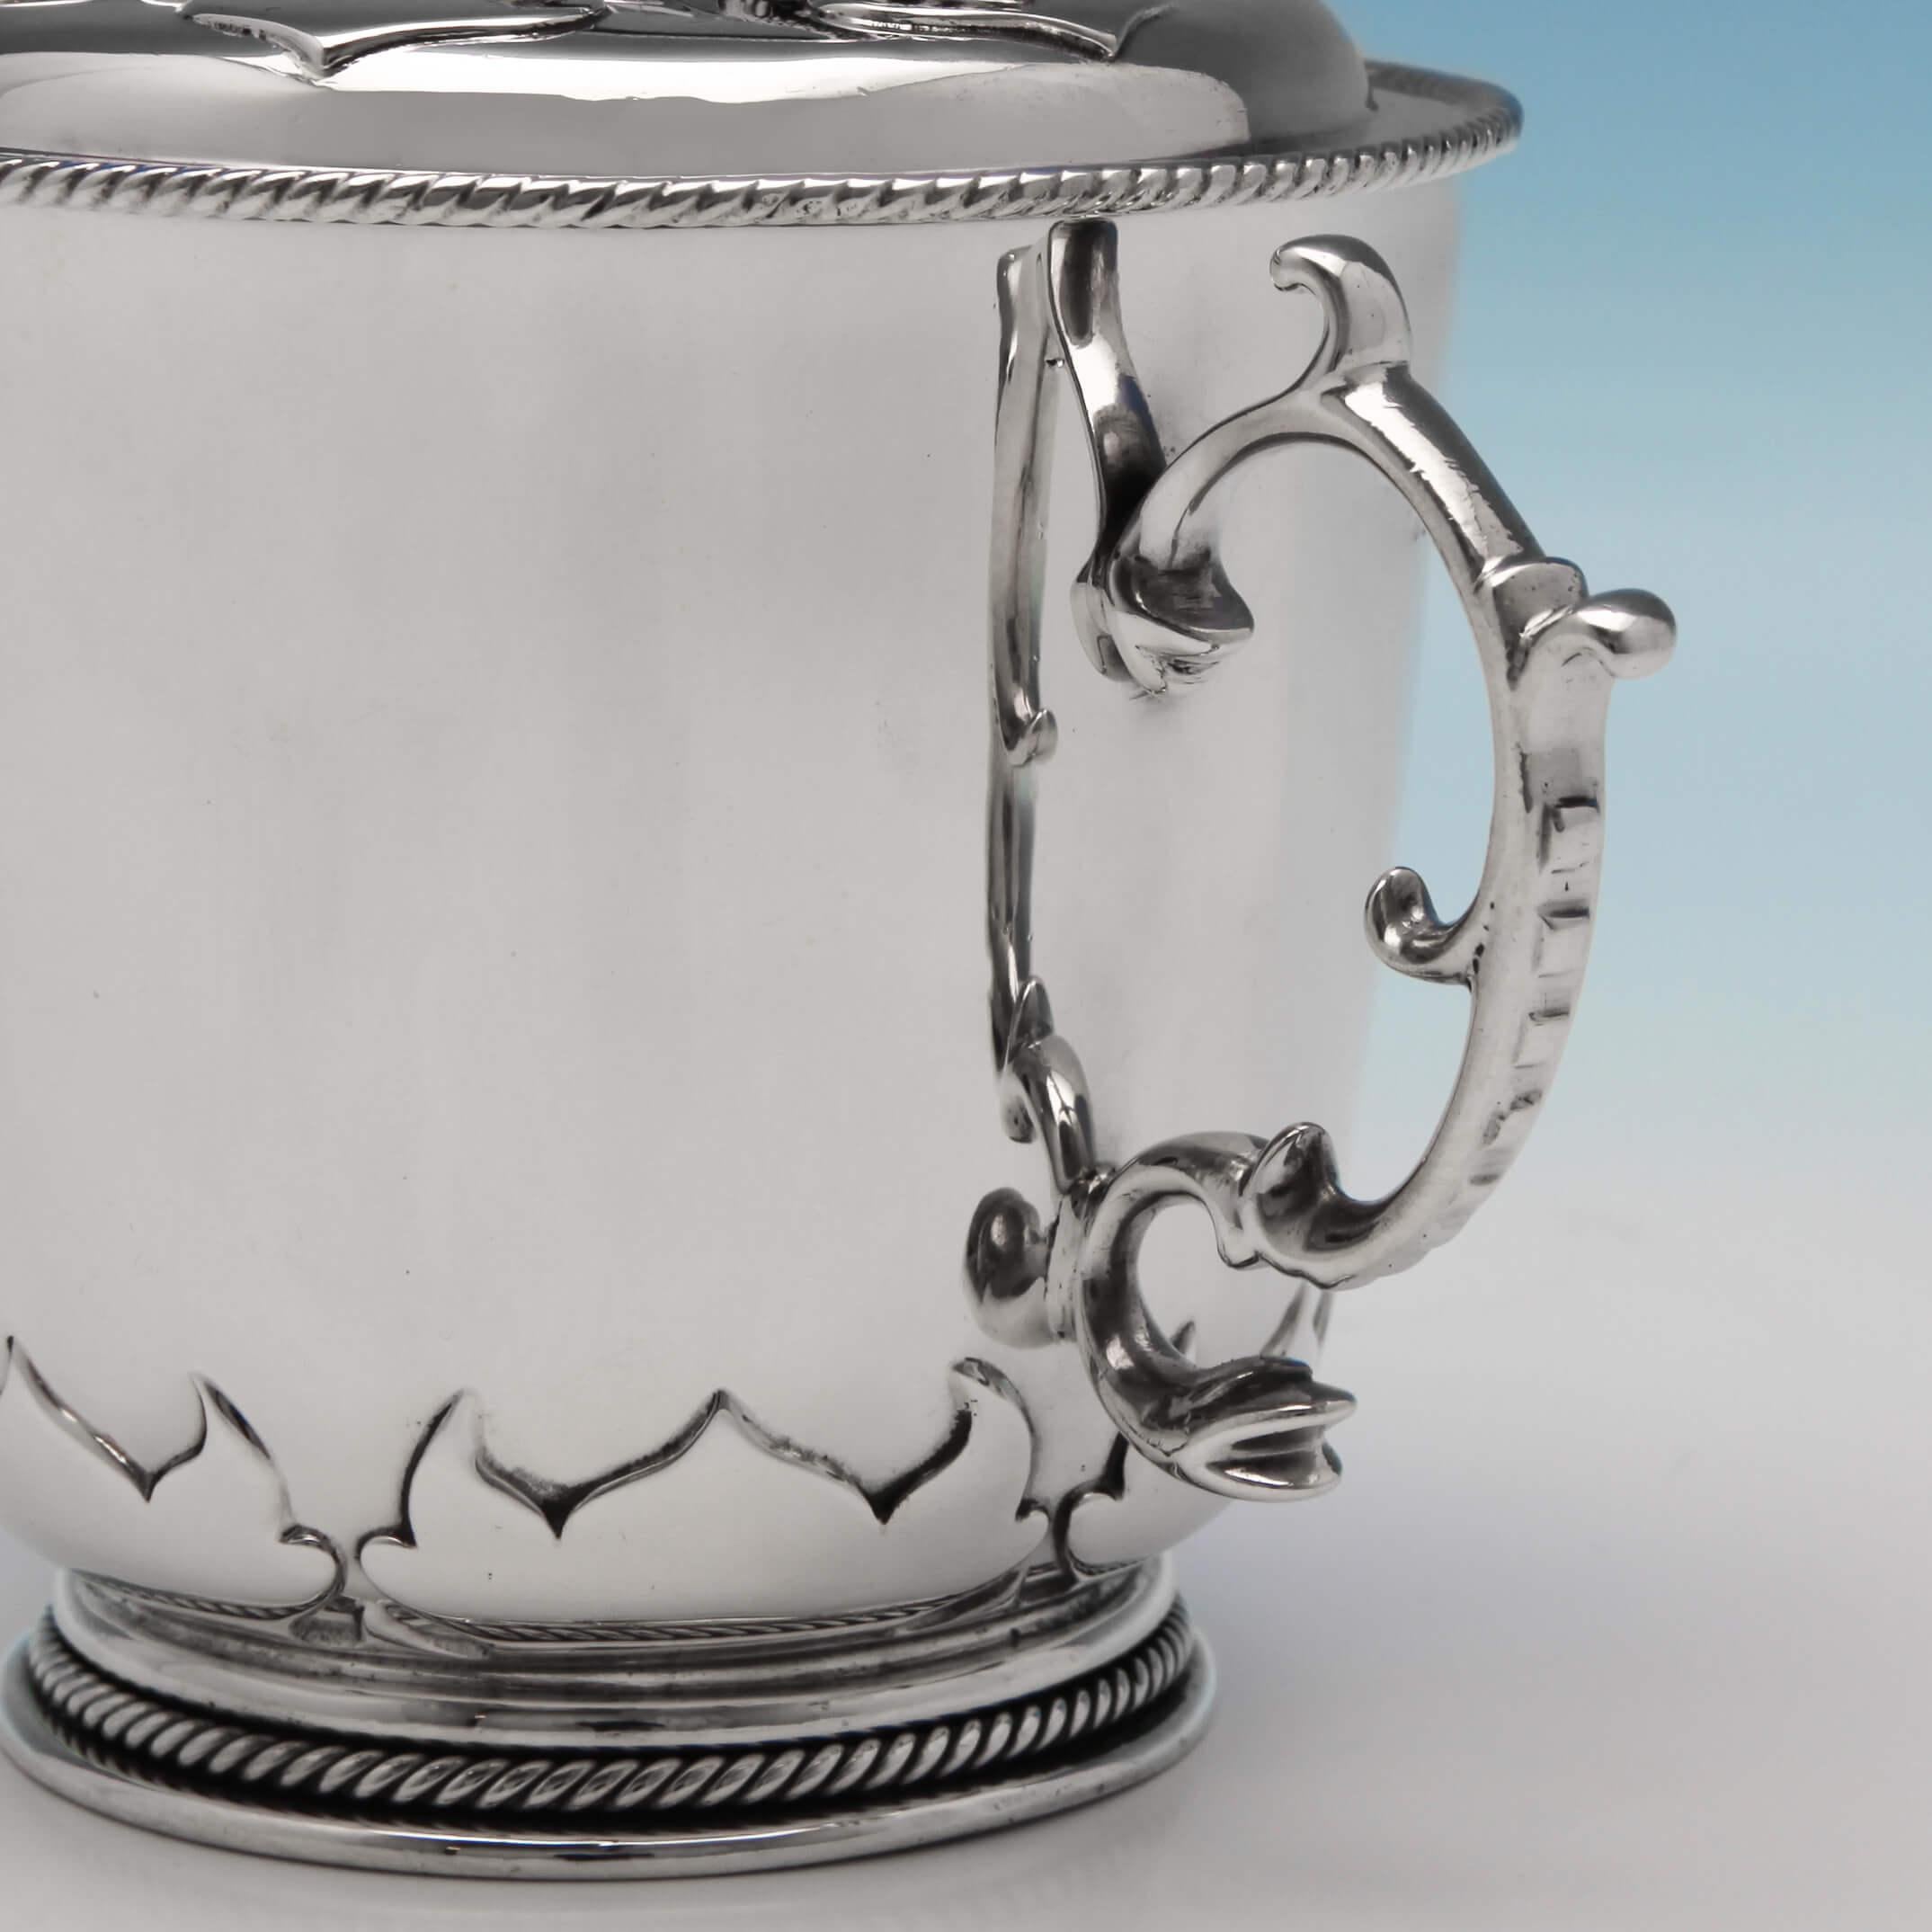 Arts and Crafts Arts & Crafts Period Britannia Standard Silver Porringer by Tessier in 1911 For Sale